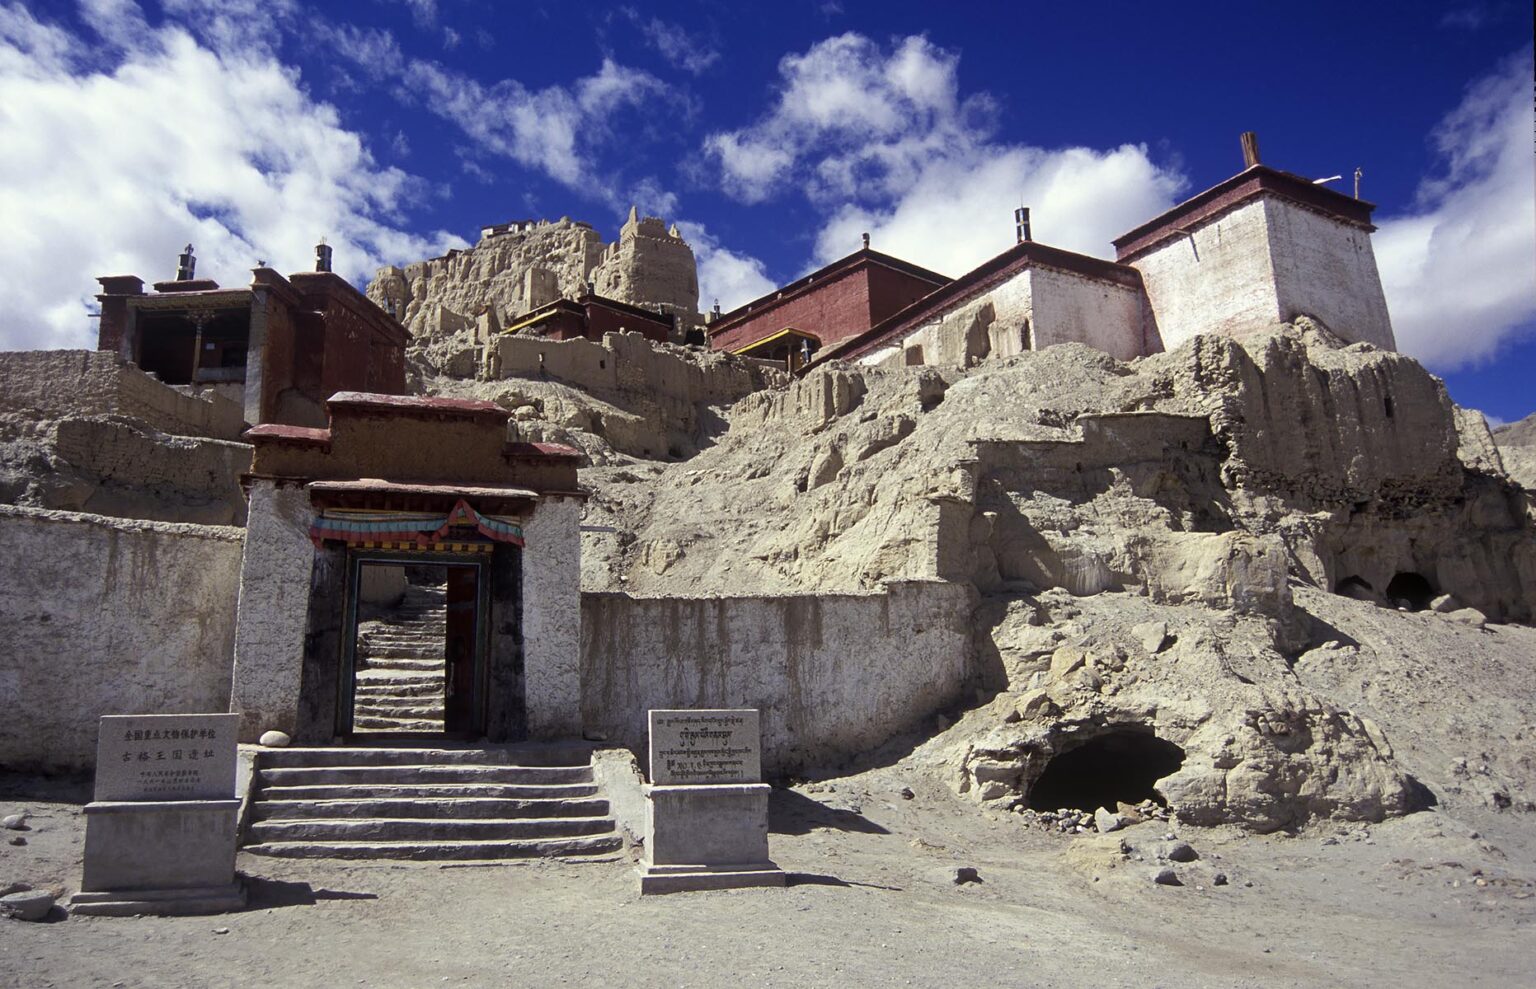 TSAPARANG (10th C.), the lost city of the GUGE KINGDOM located west of KAILASH, has some of TIBET'S best BUDDHIST ART